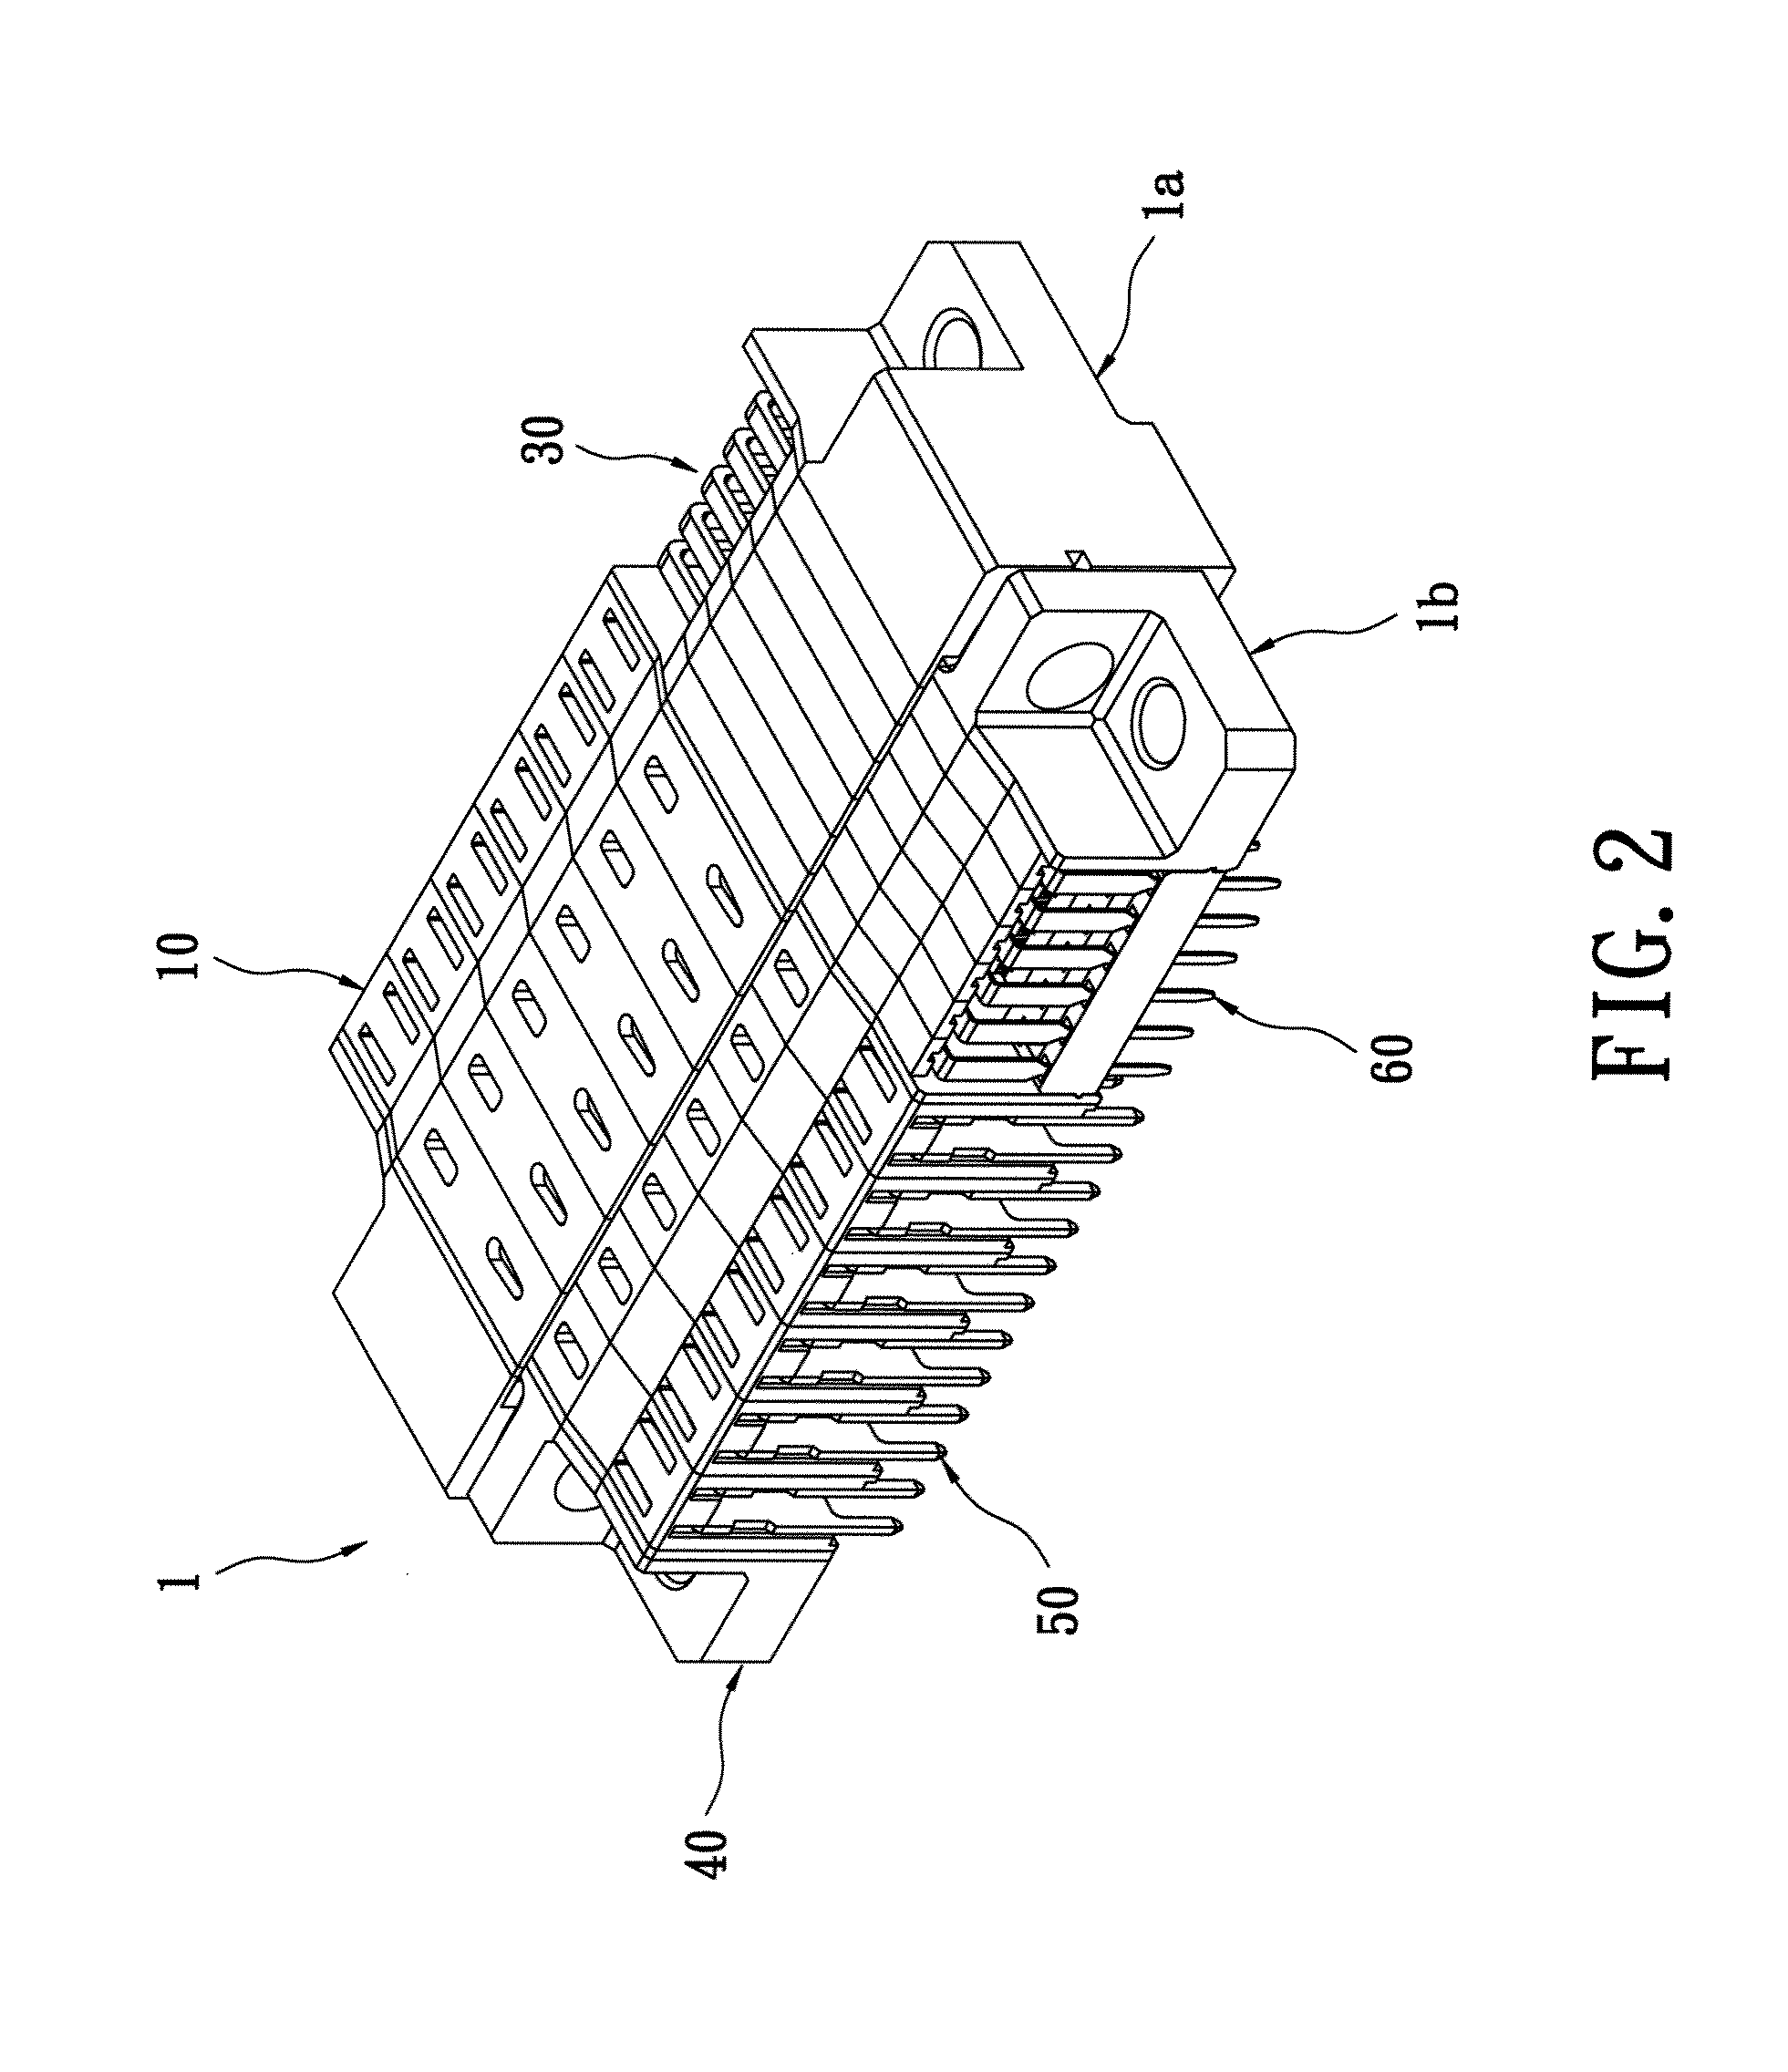 Power connector assembly with improved terminals